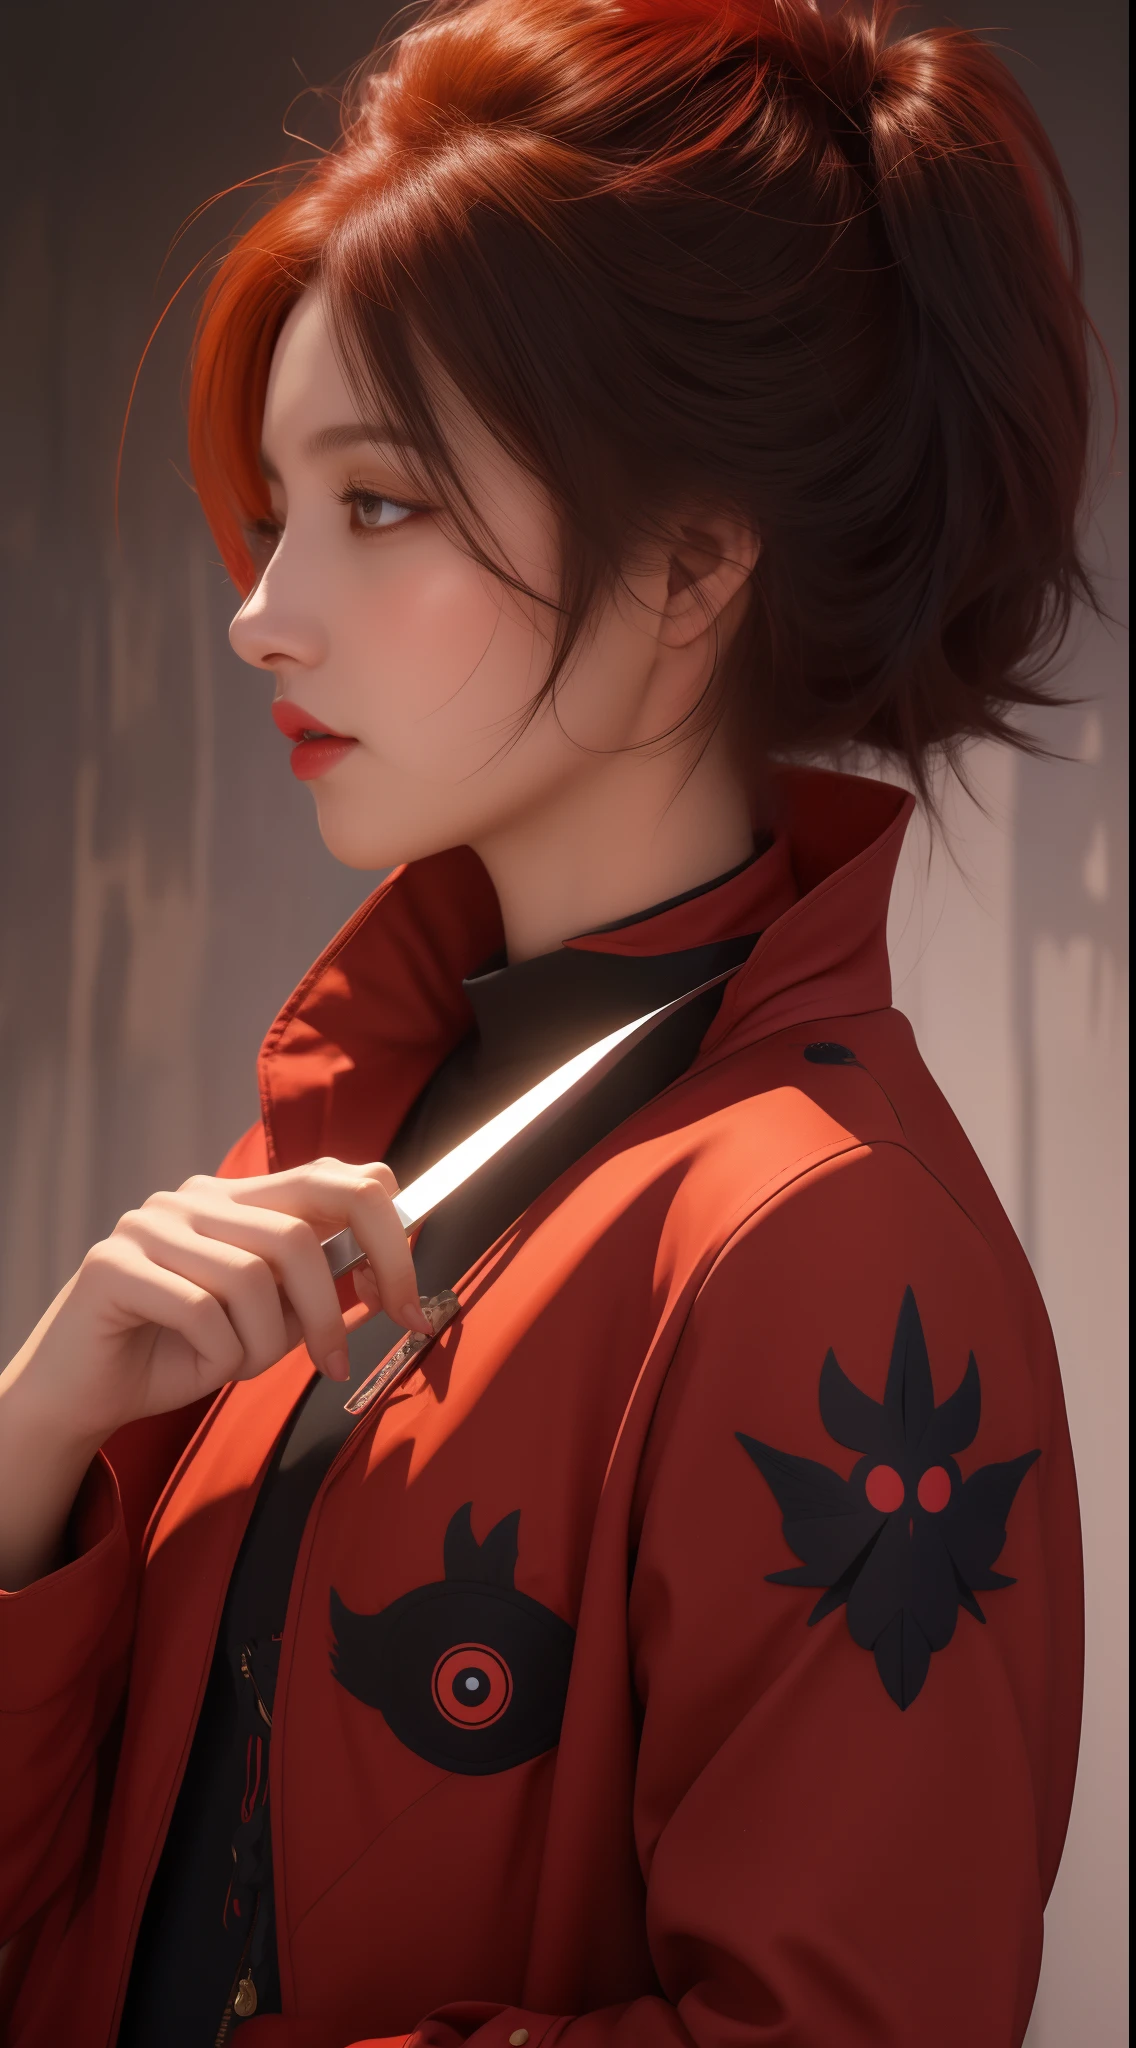 anime character with red eyes and a red jacket holding a knife, gapmoe yandere grimdark, ken kaneki, kaneki ken, gapmoe yandere, yandere, neferpitou, yandere intricate, portrait gapmoe yandere grimdark, artoria pendragon, avatar image, l vampire, epic anime style, red-eyed, red - eyed, ultradetailed, upscaled,spider tattoo,high quality, bold and majestic look,side profile, Side profile